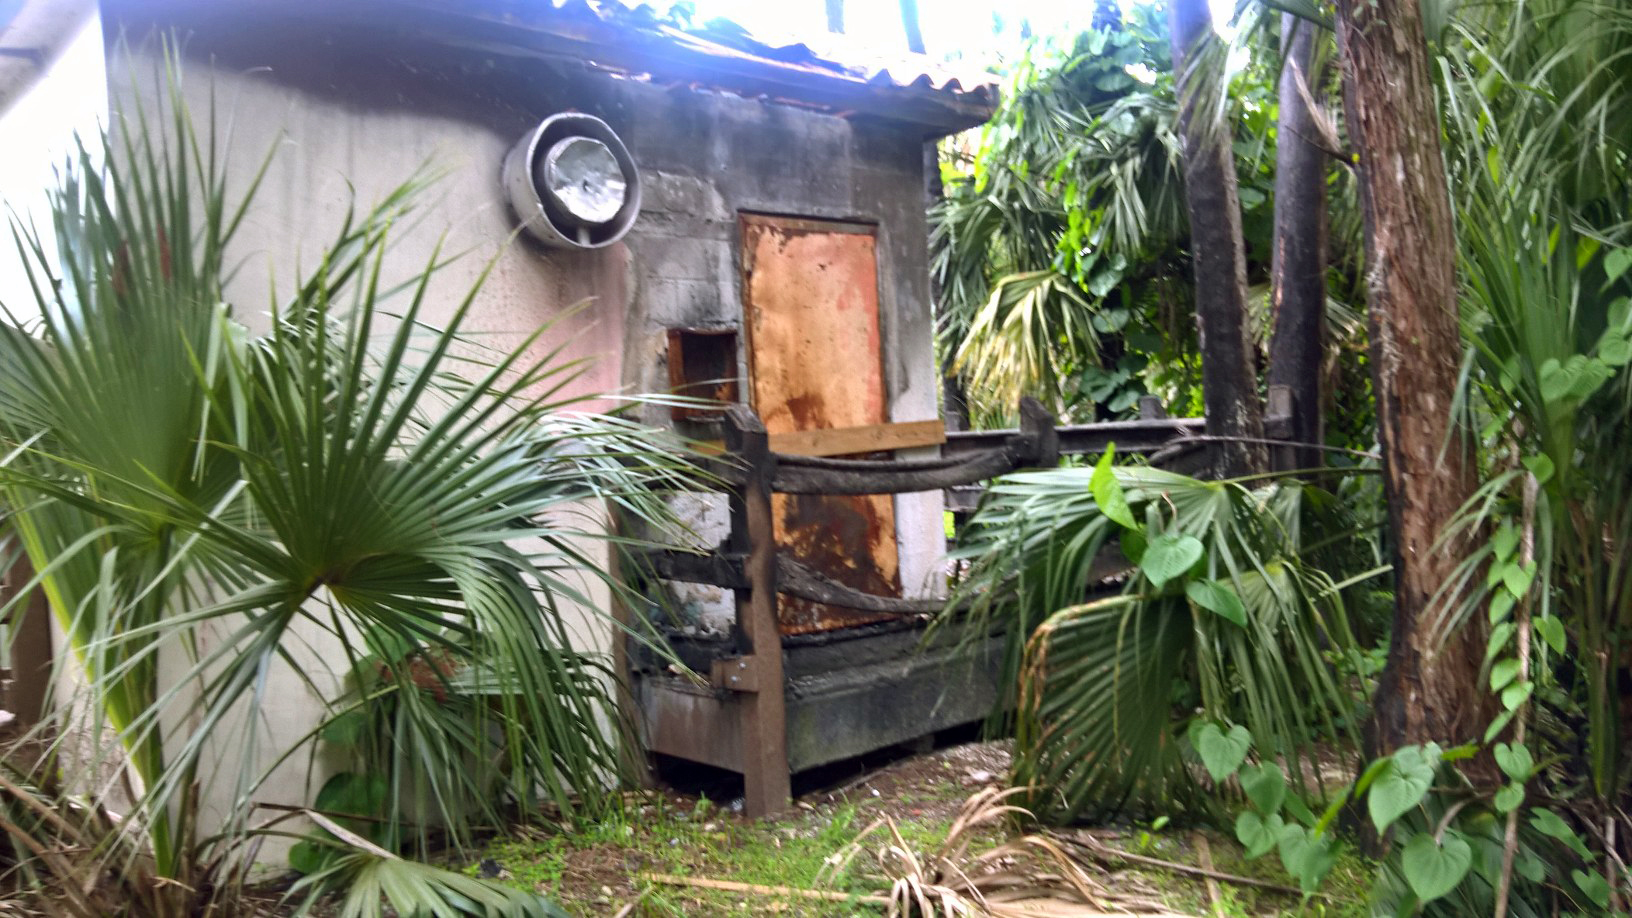 Bathrooms at Fern Glen Park in Coral Springs destroyed by an electrical fire.